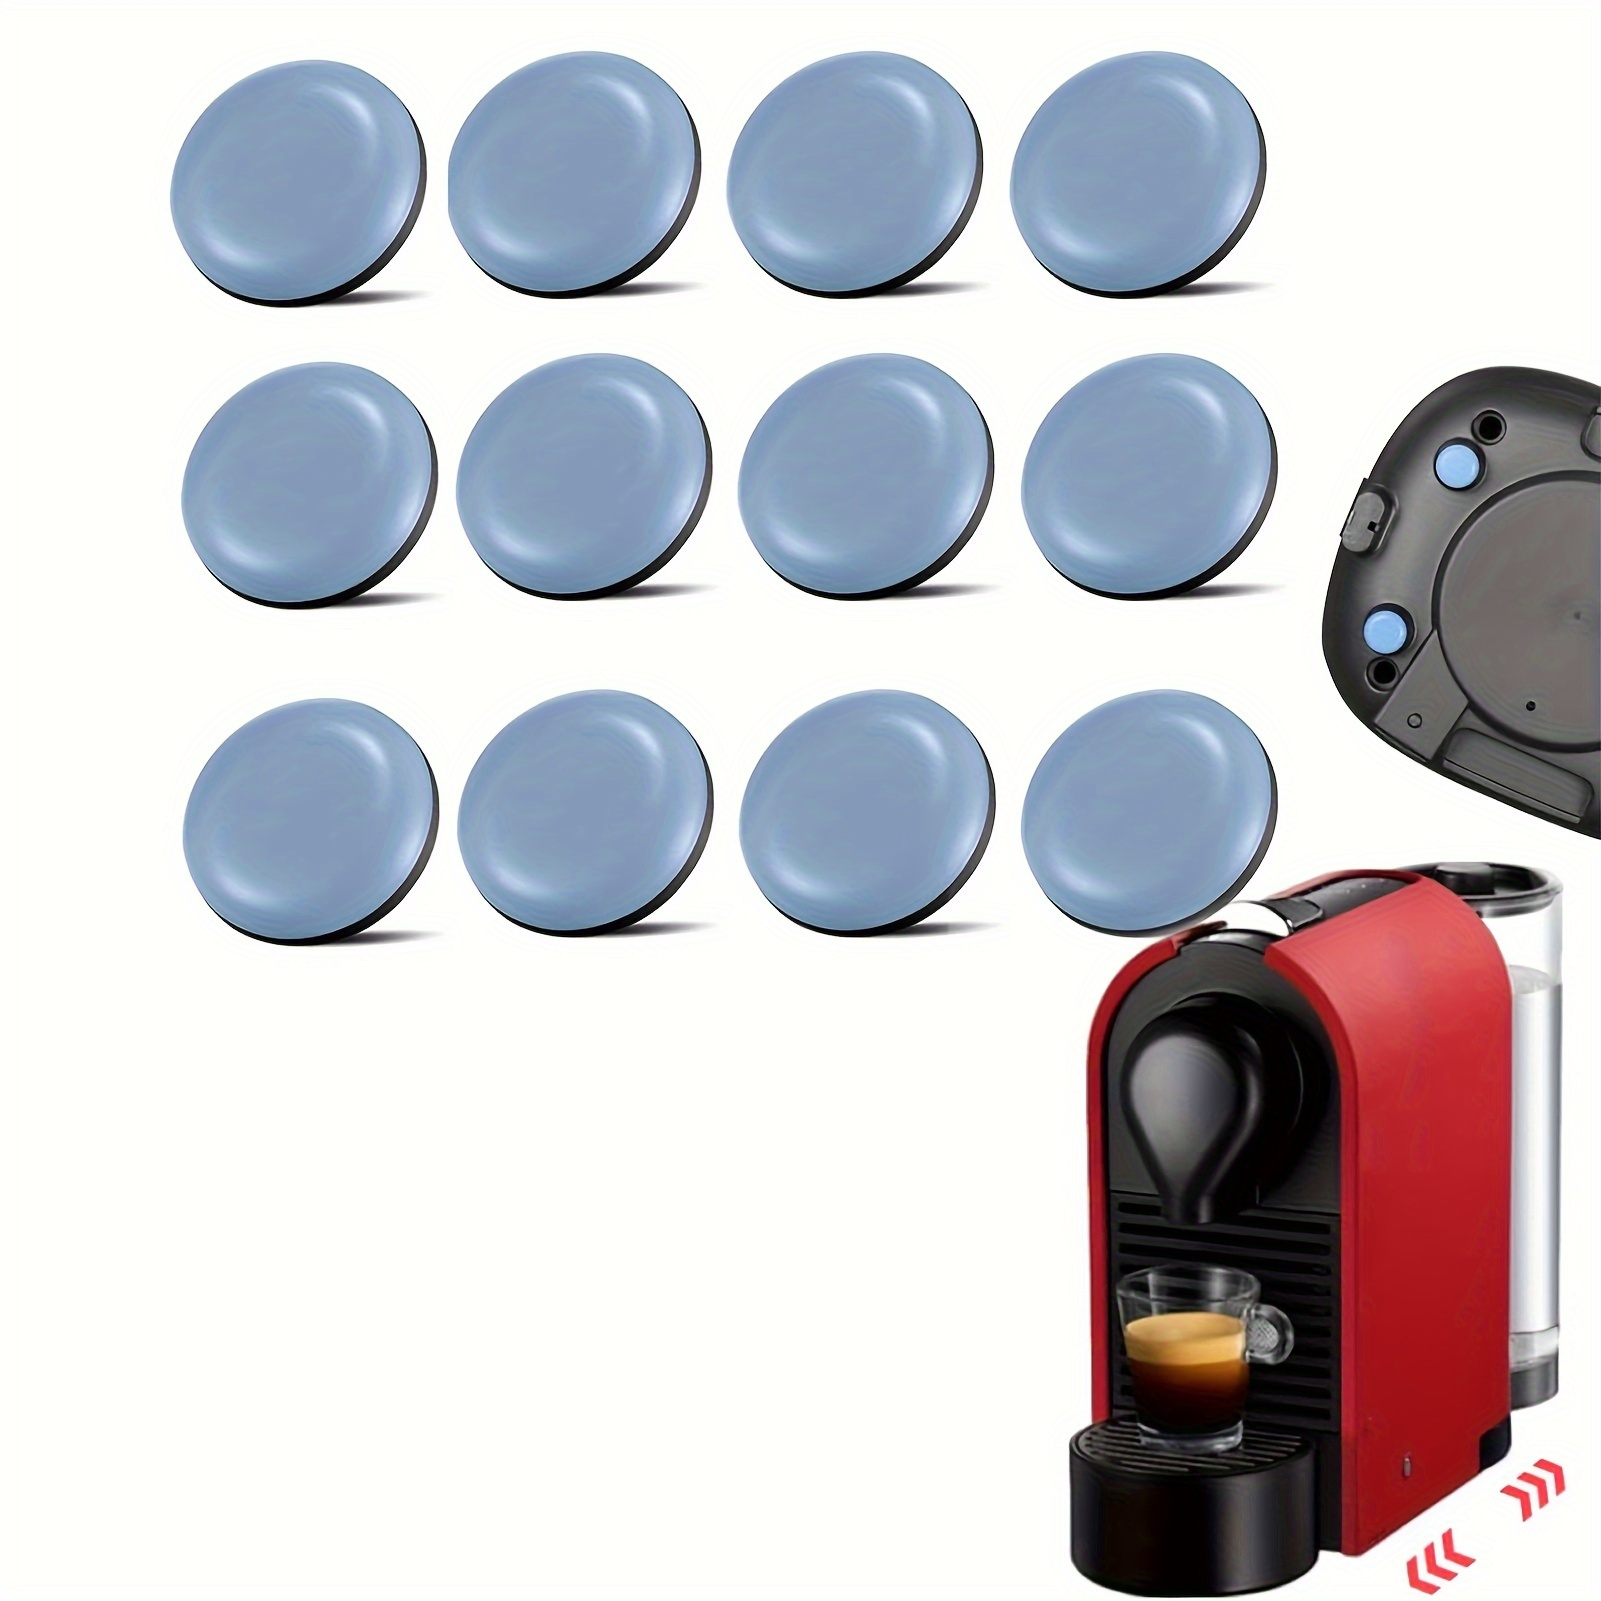 12pcs Appliance Slider For Kitchen Appliances, Self-Adhesive DIY Small  Kitchen Appliance Slider,Easy To Move And Space-saving Kitchen Essential  Gadget